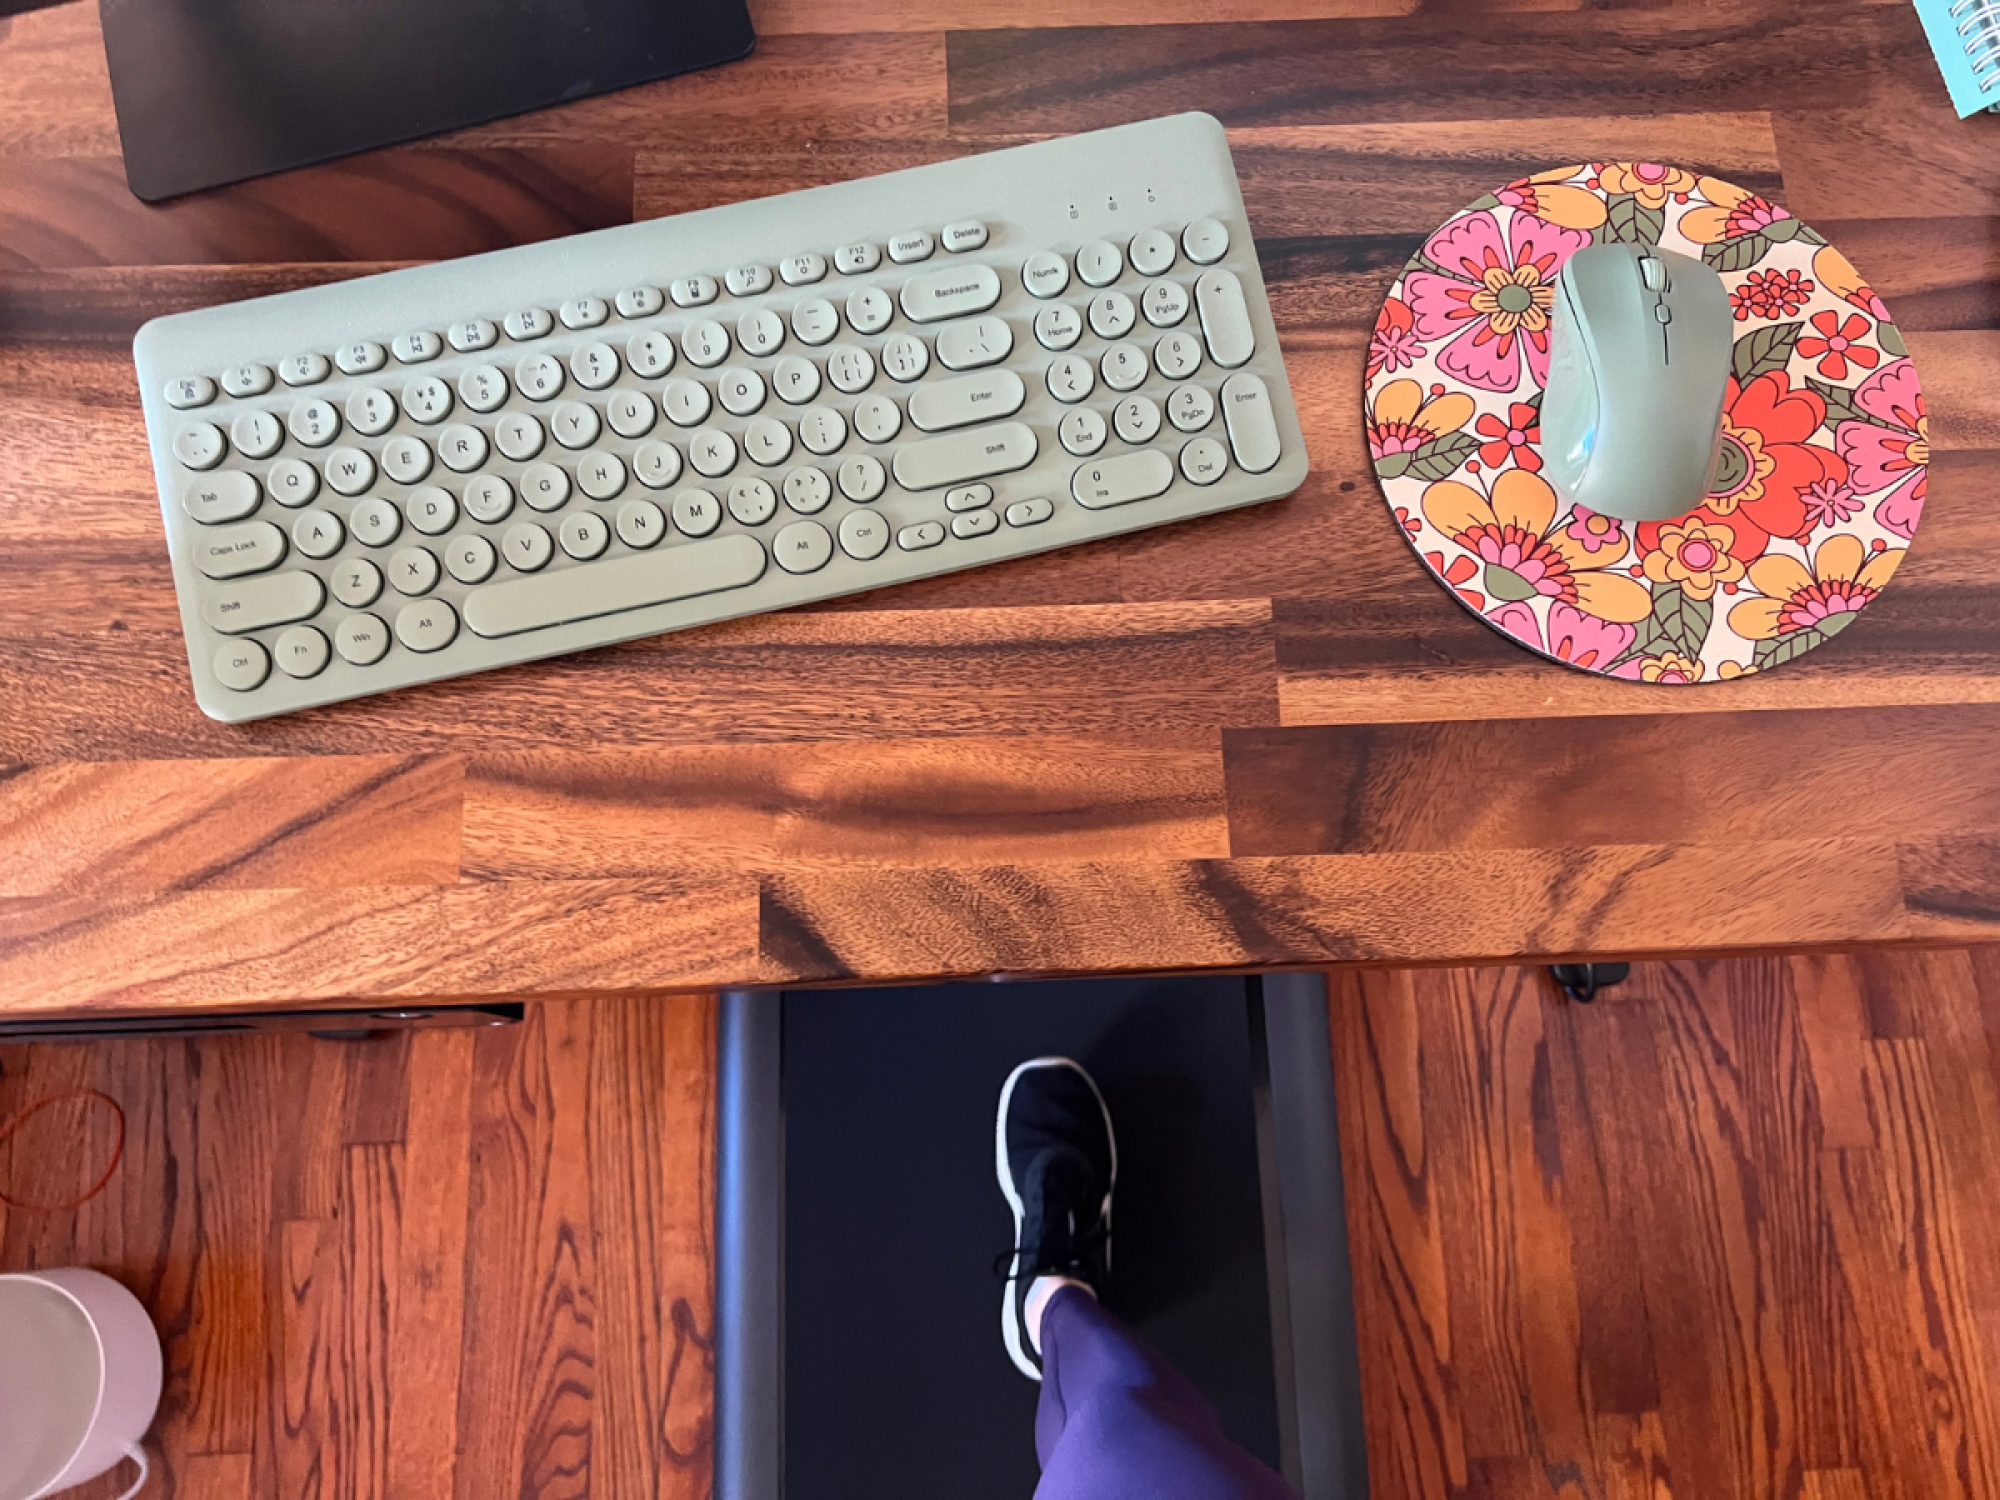 keyboard and mouse on desktop with feet walking on treadmill in background